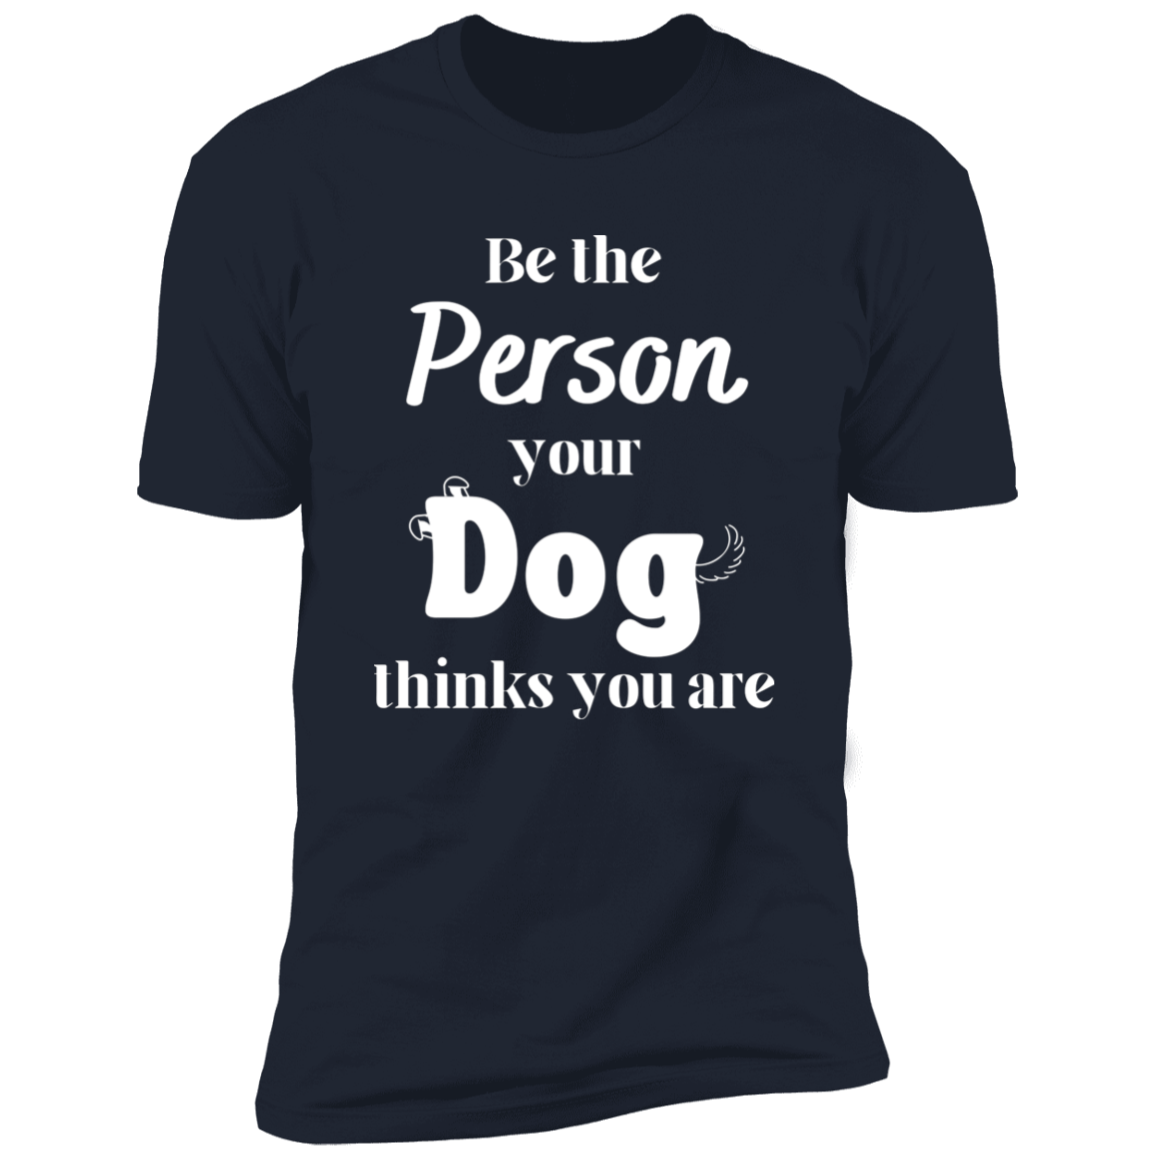 Be the Person Your Dog Thinks You Are T-shirt, Dog Shirt for humans, in navy blue